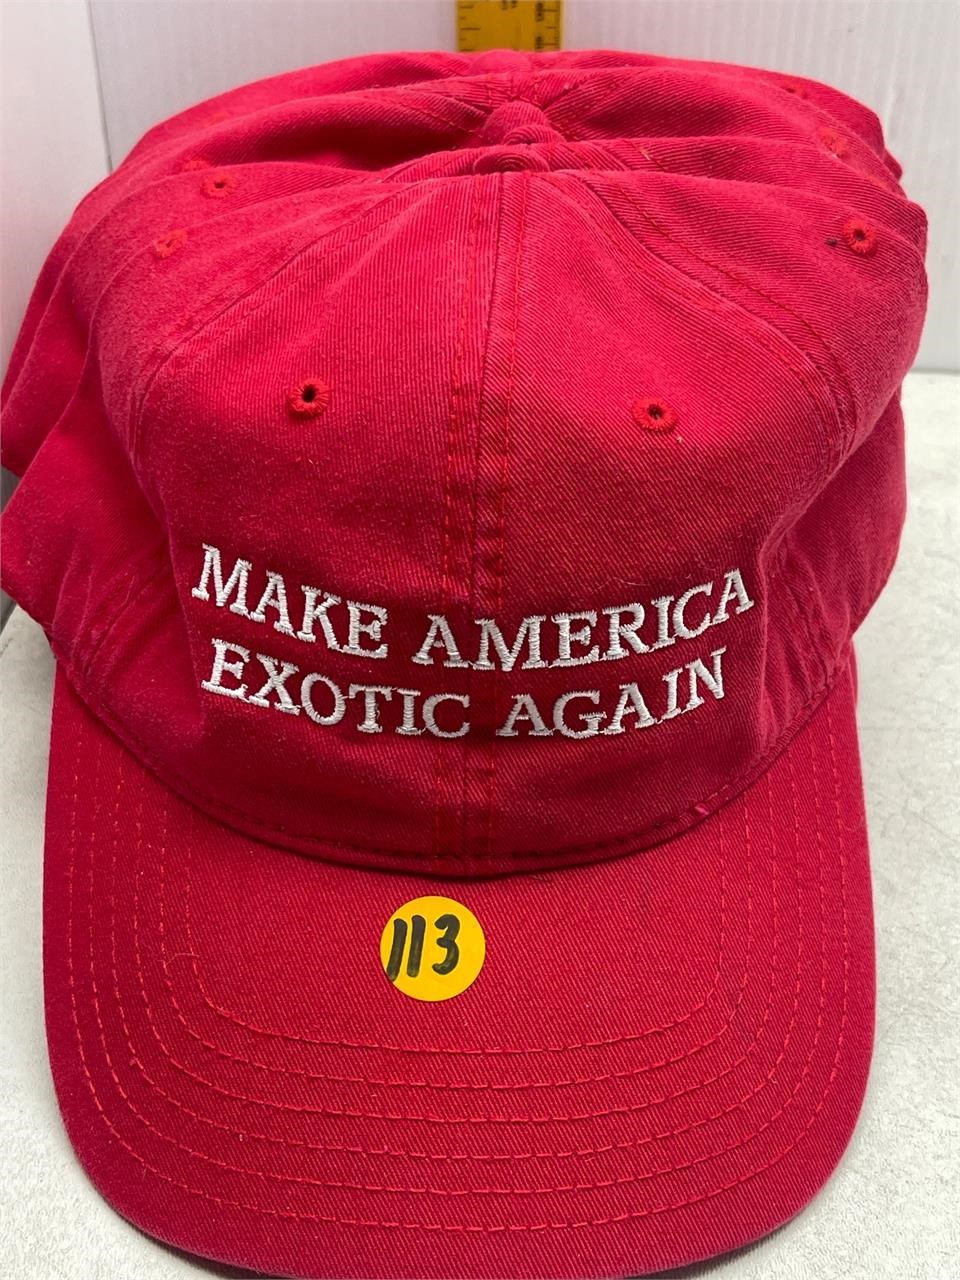 11- “MAKE AMERICA EXOTIC AGAIN” HATS BY TIGER KING